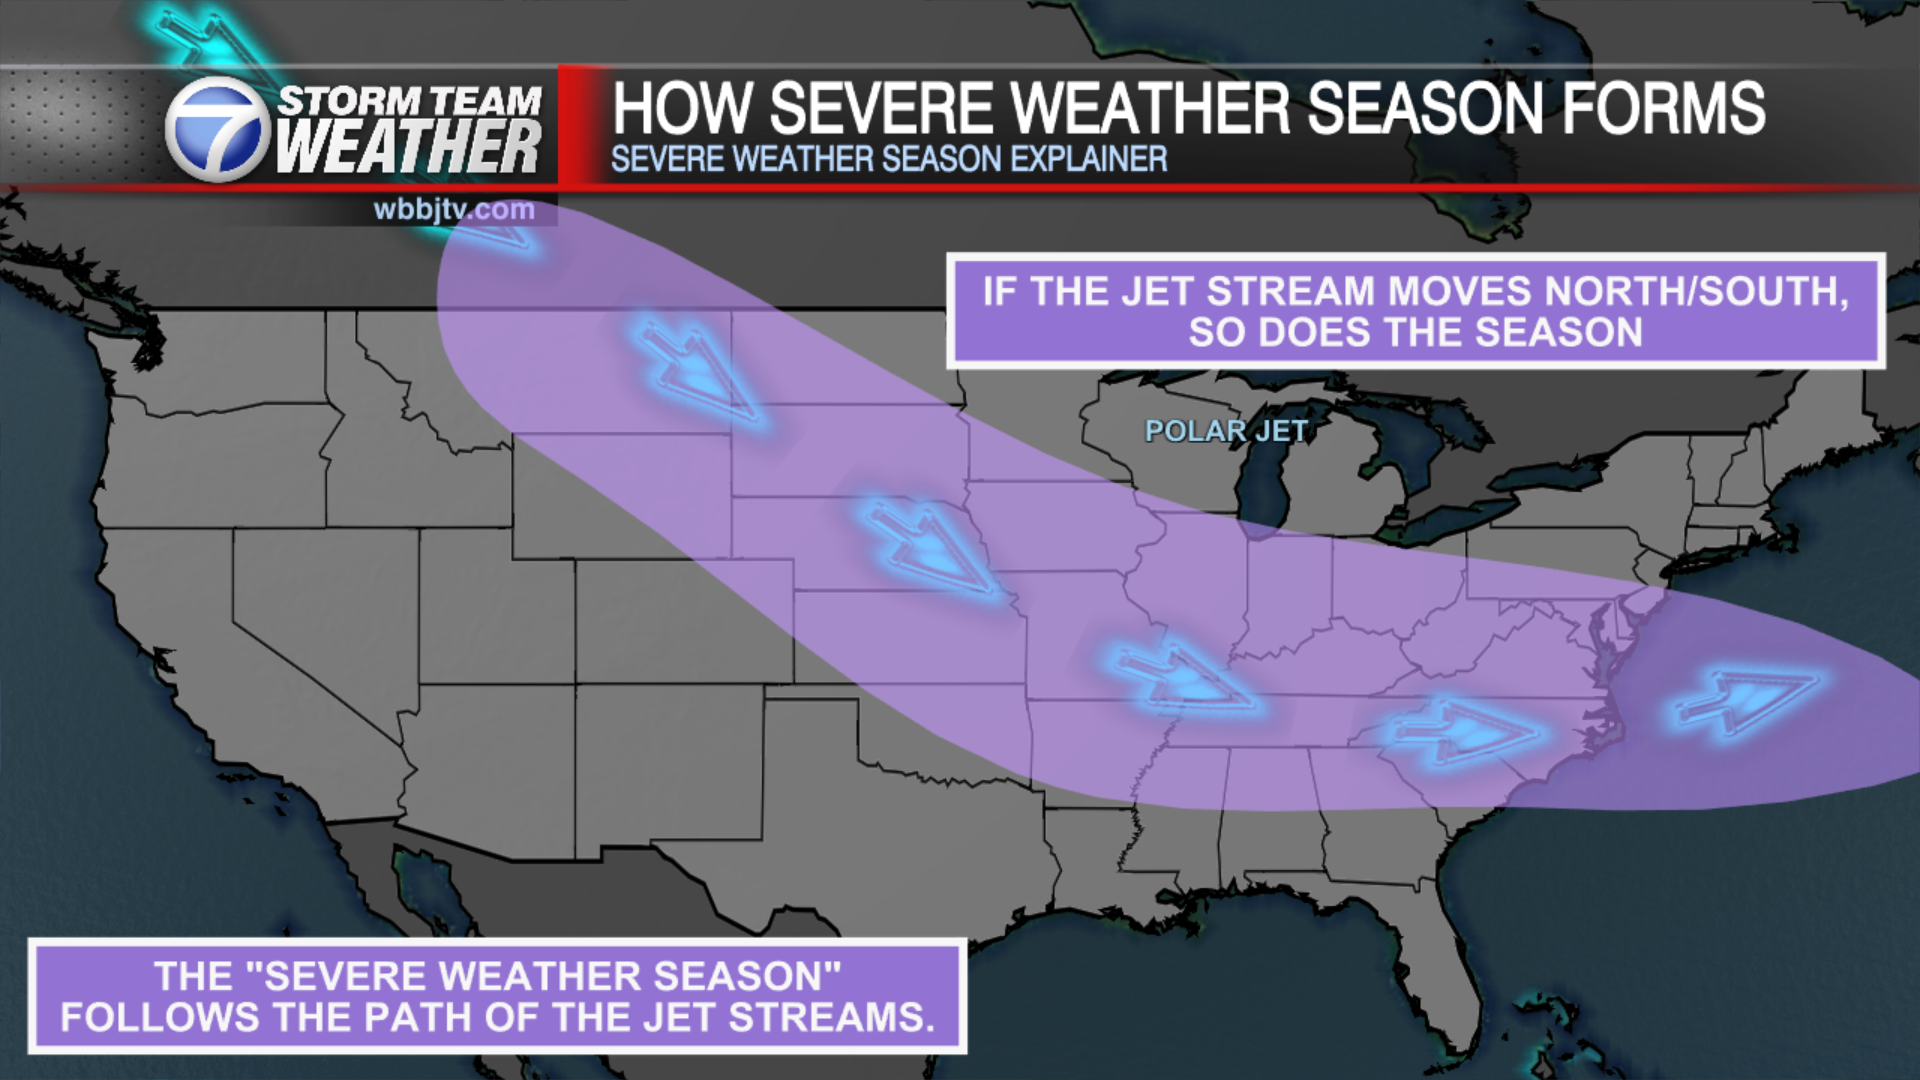 How Does the Jet Stream Correlate with Severe Weather Season? - WBBJ TV